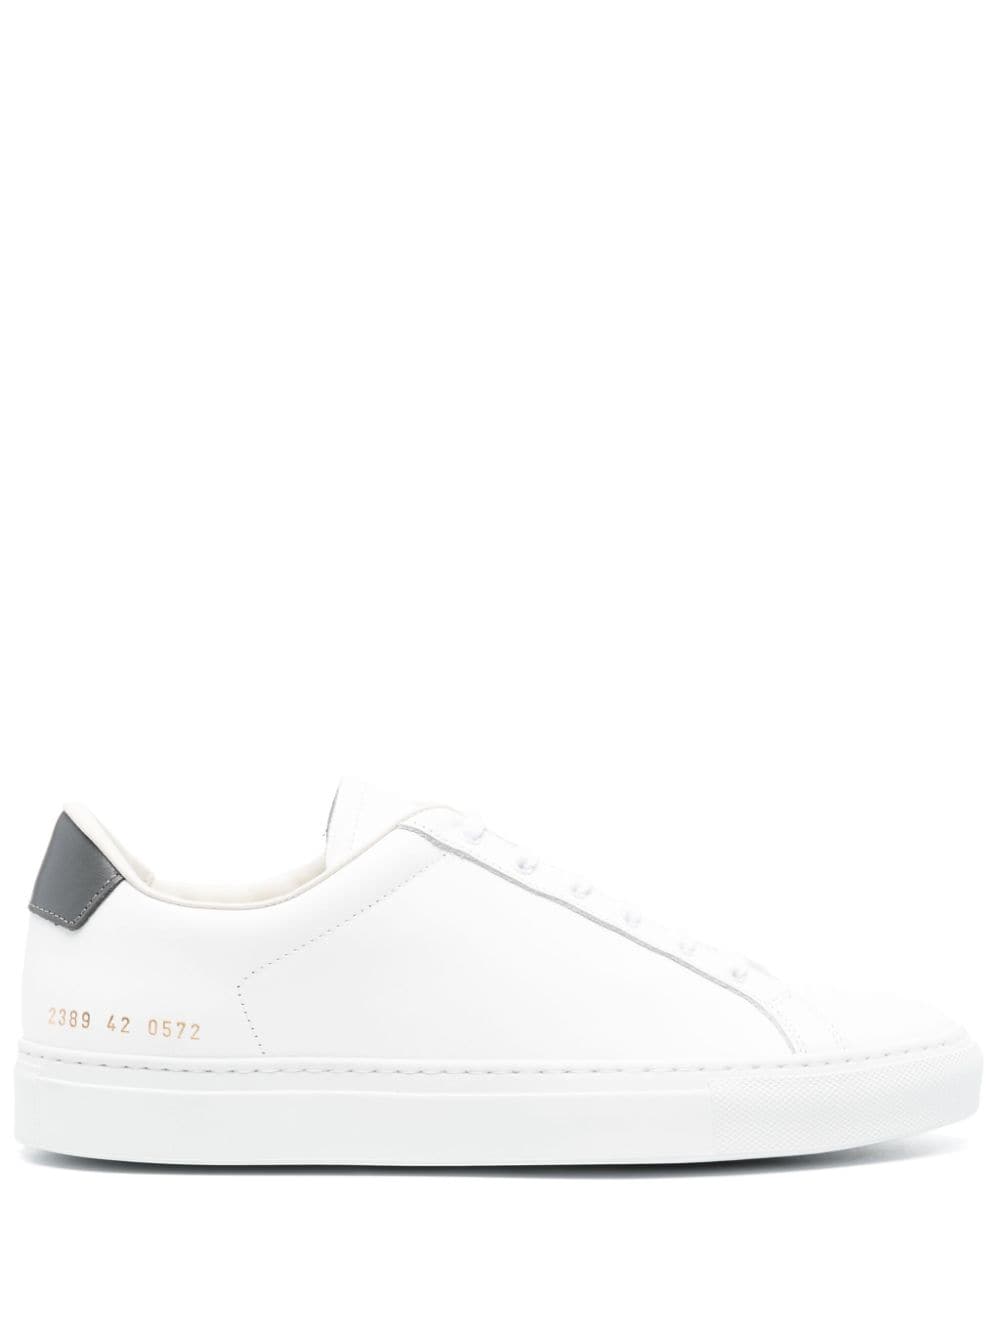 Common Projects Tennis Leather Sneakers In White